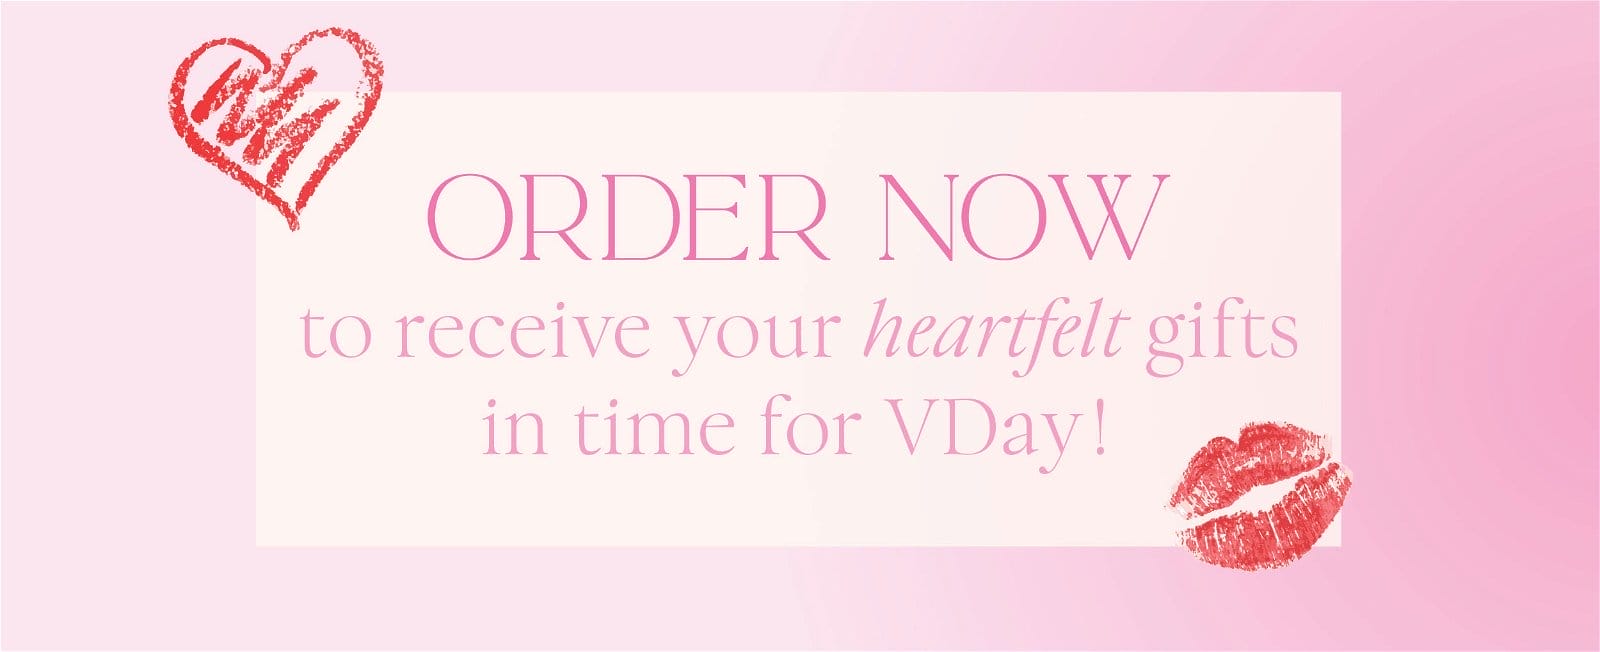 Order now to receive your heartfelt gifts in time for VDay